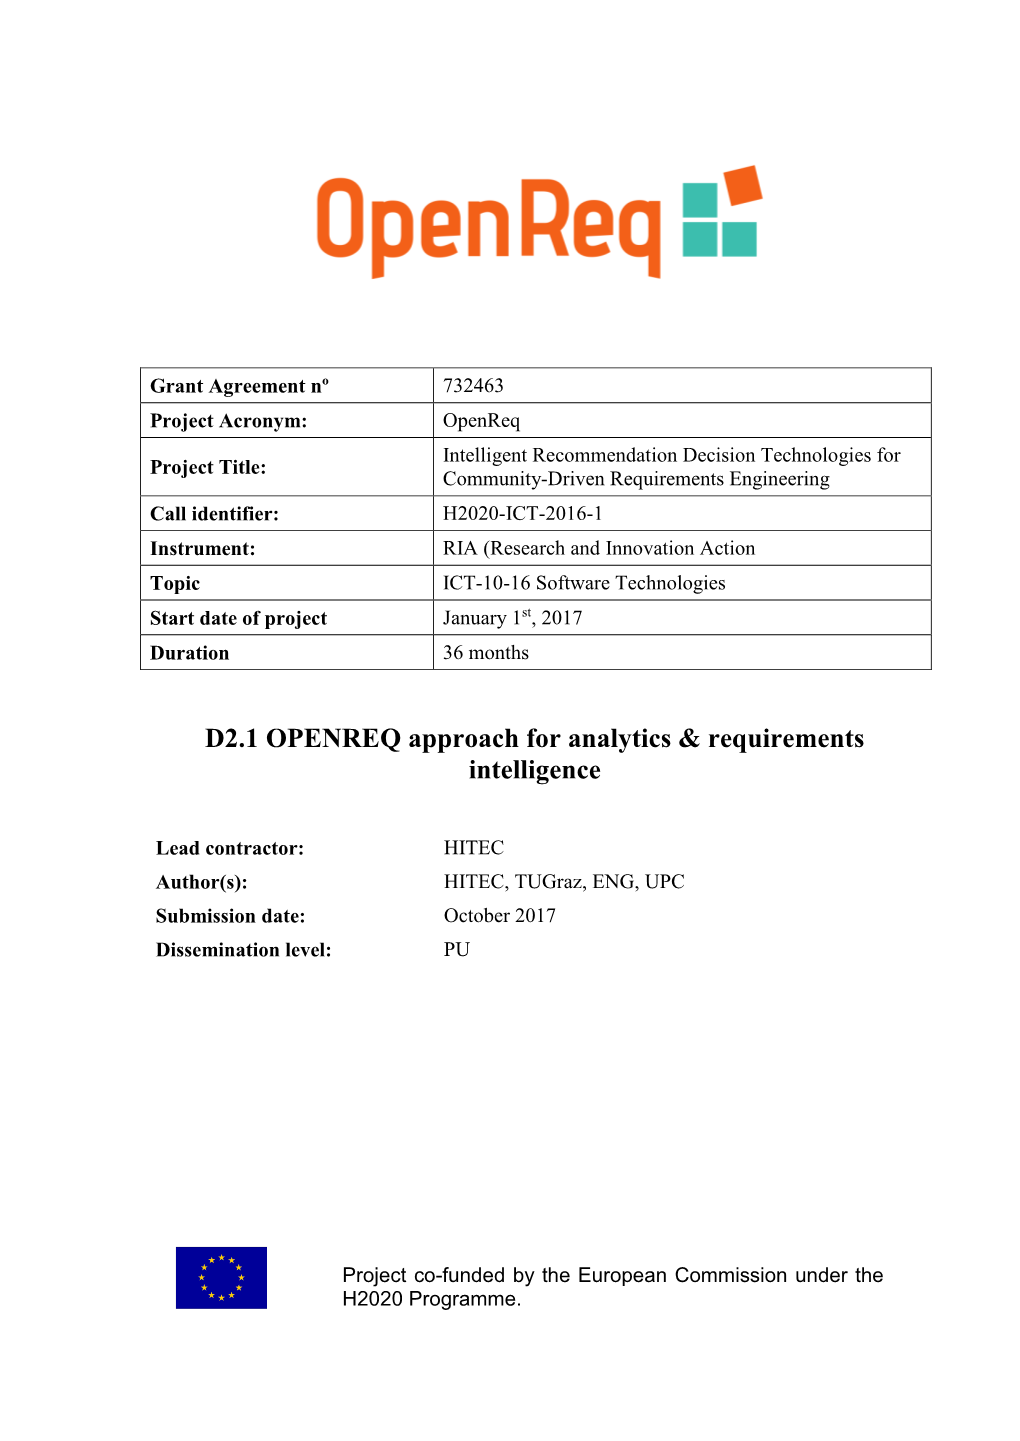 D2.1 OPENREQ Approach for Analytics & Requirements Intelligence